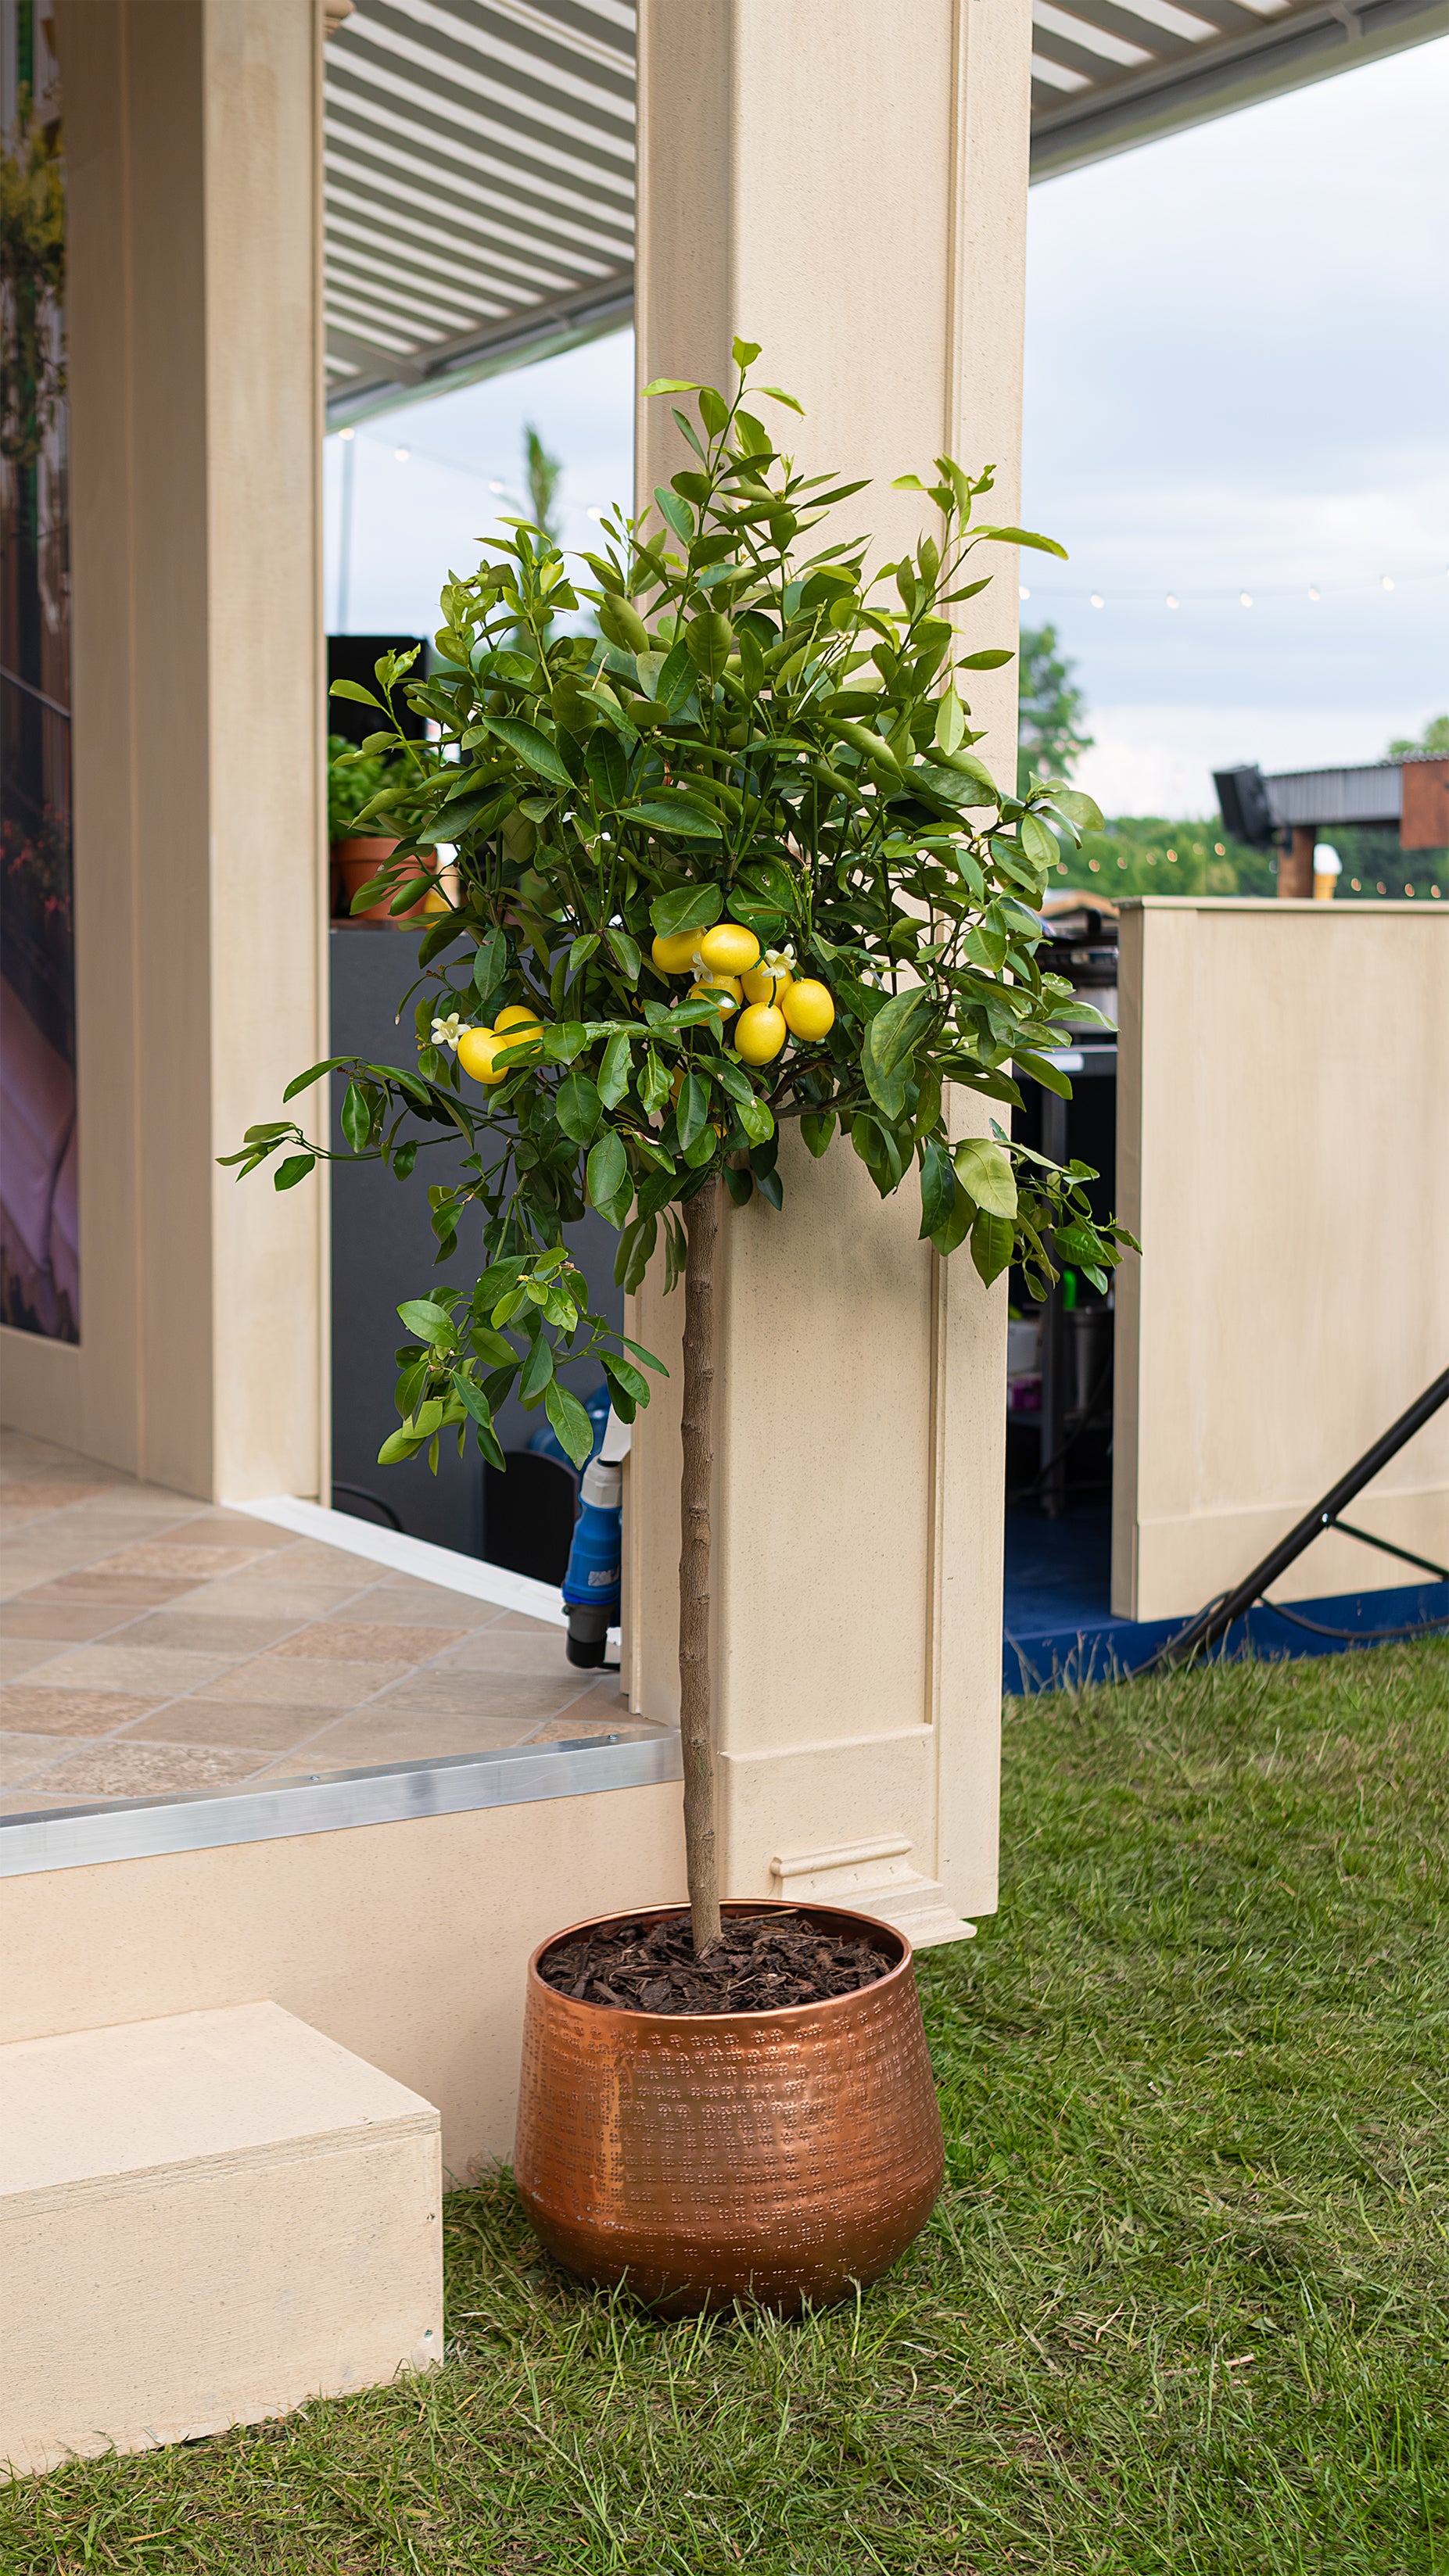 A potted lemon tree in a bronze planter at the Angelo Poretti stand during Regent’s Park Taste Festival. The vibrant greenery and yellow lemons add a touch of freshness, complementing the Mediterranean-themed floral arrangement. Plant hire by Florist Amaranté London.